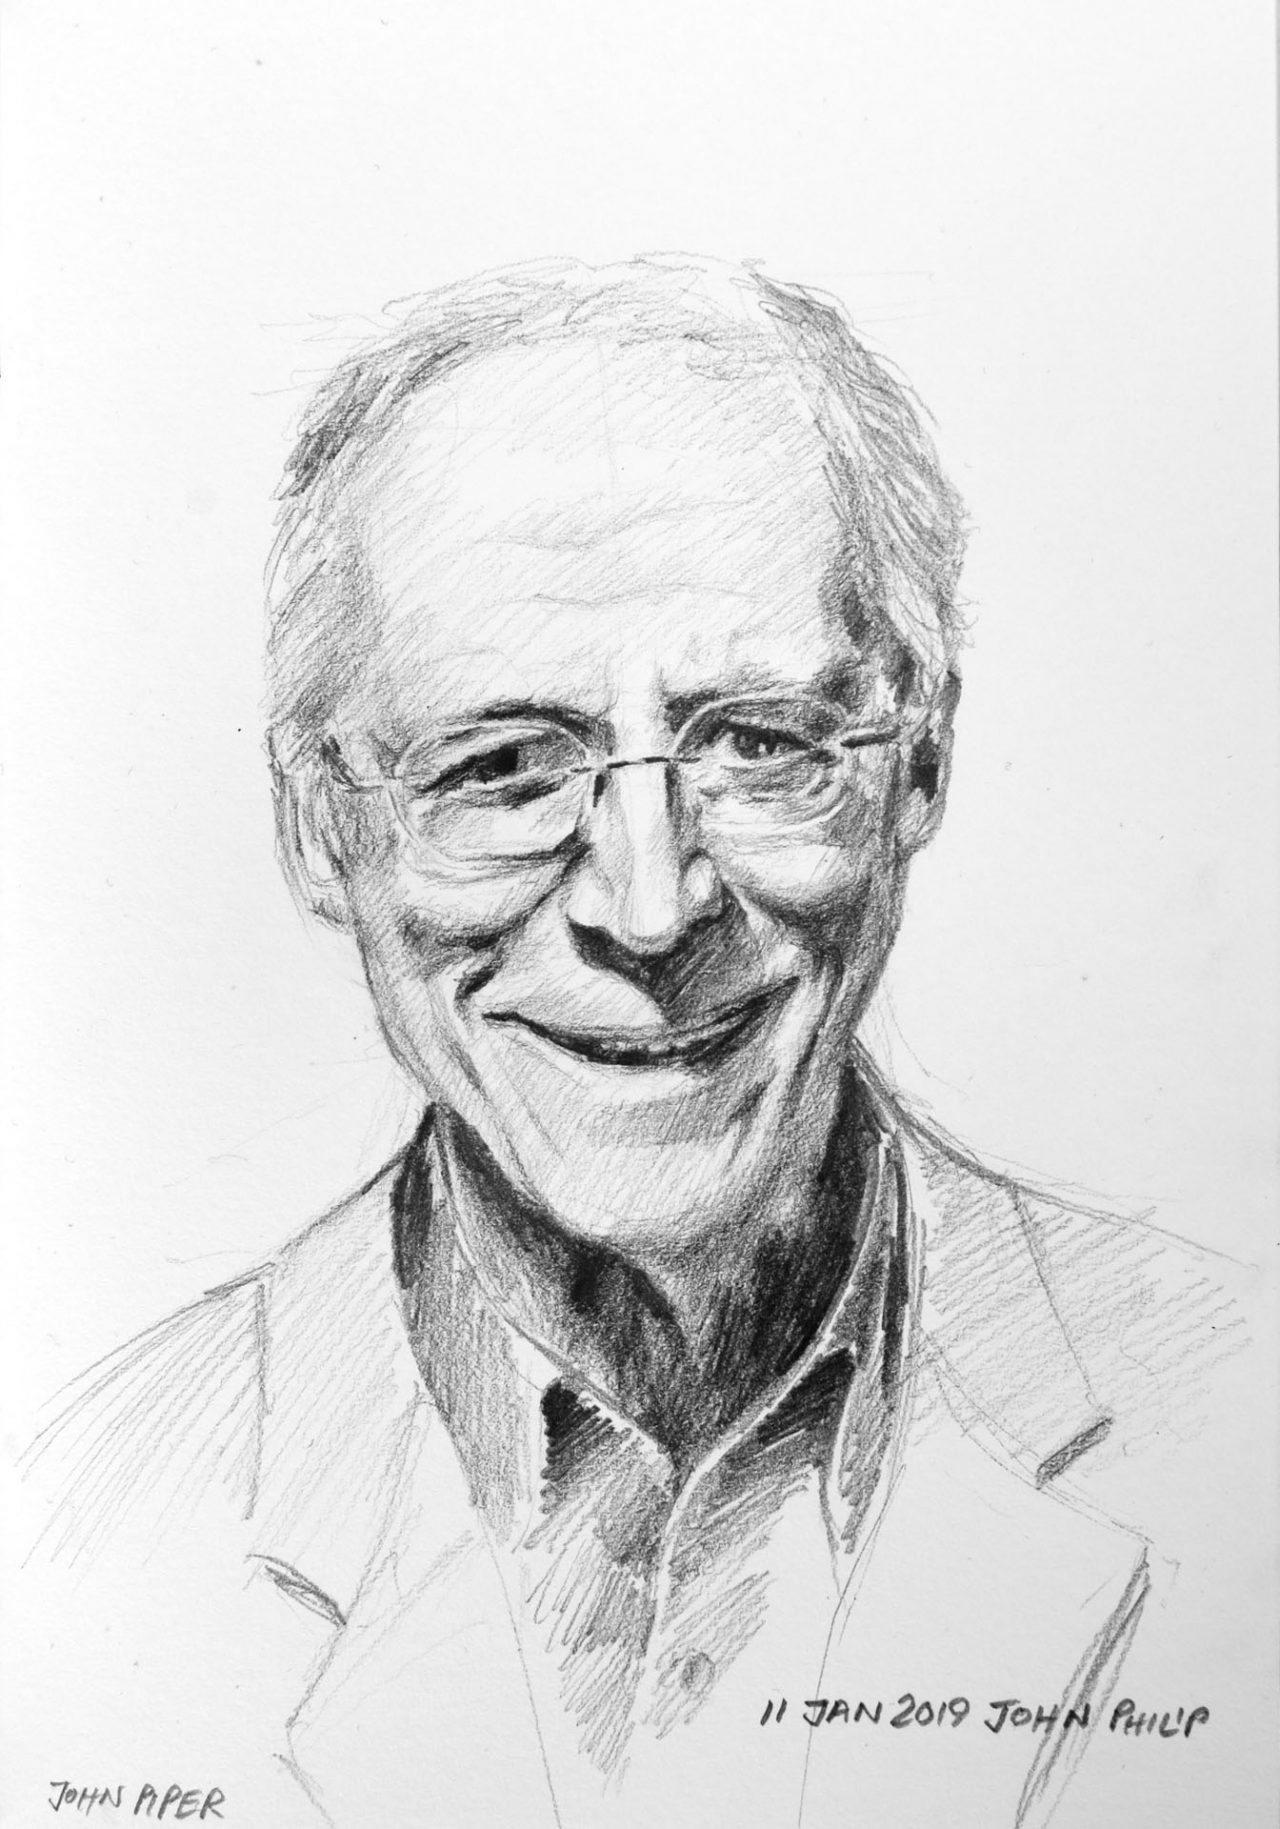 John Piper - Author, Christian Theologian and Pastor